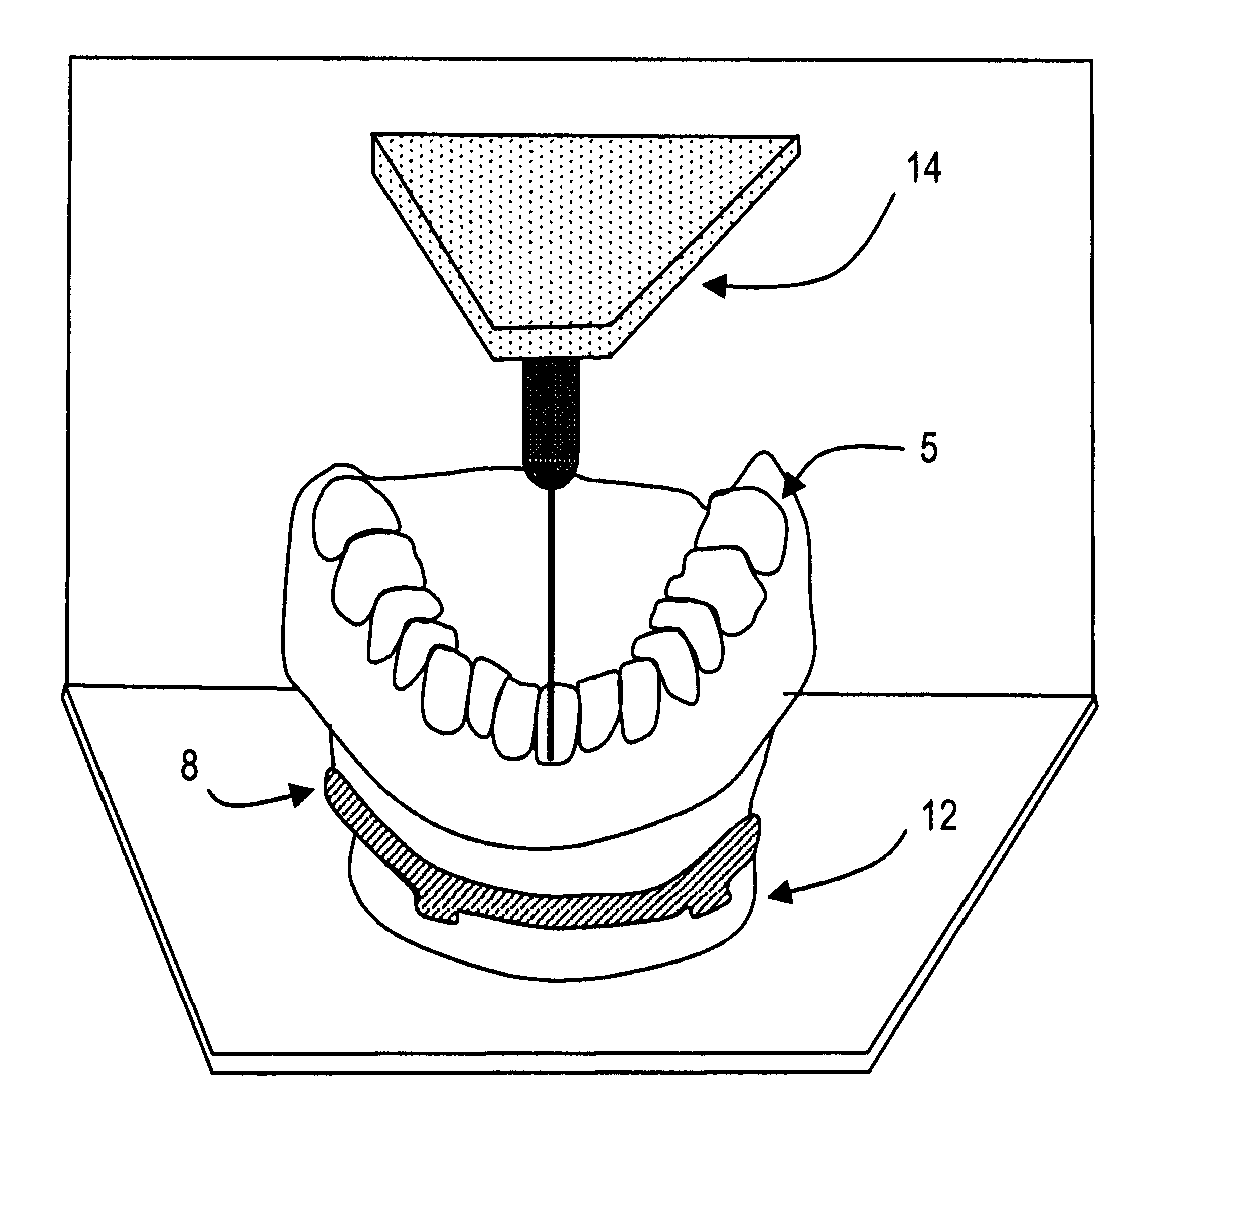 Methods for the virtual design and computer manufacture of intra oral devices